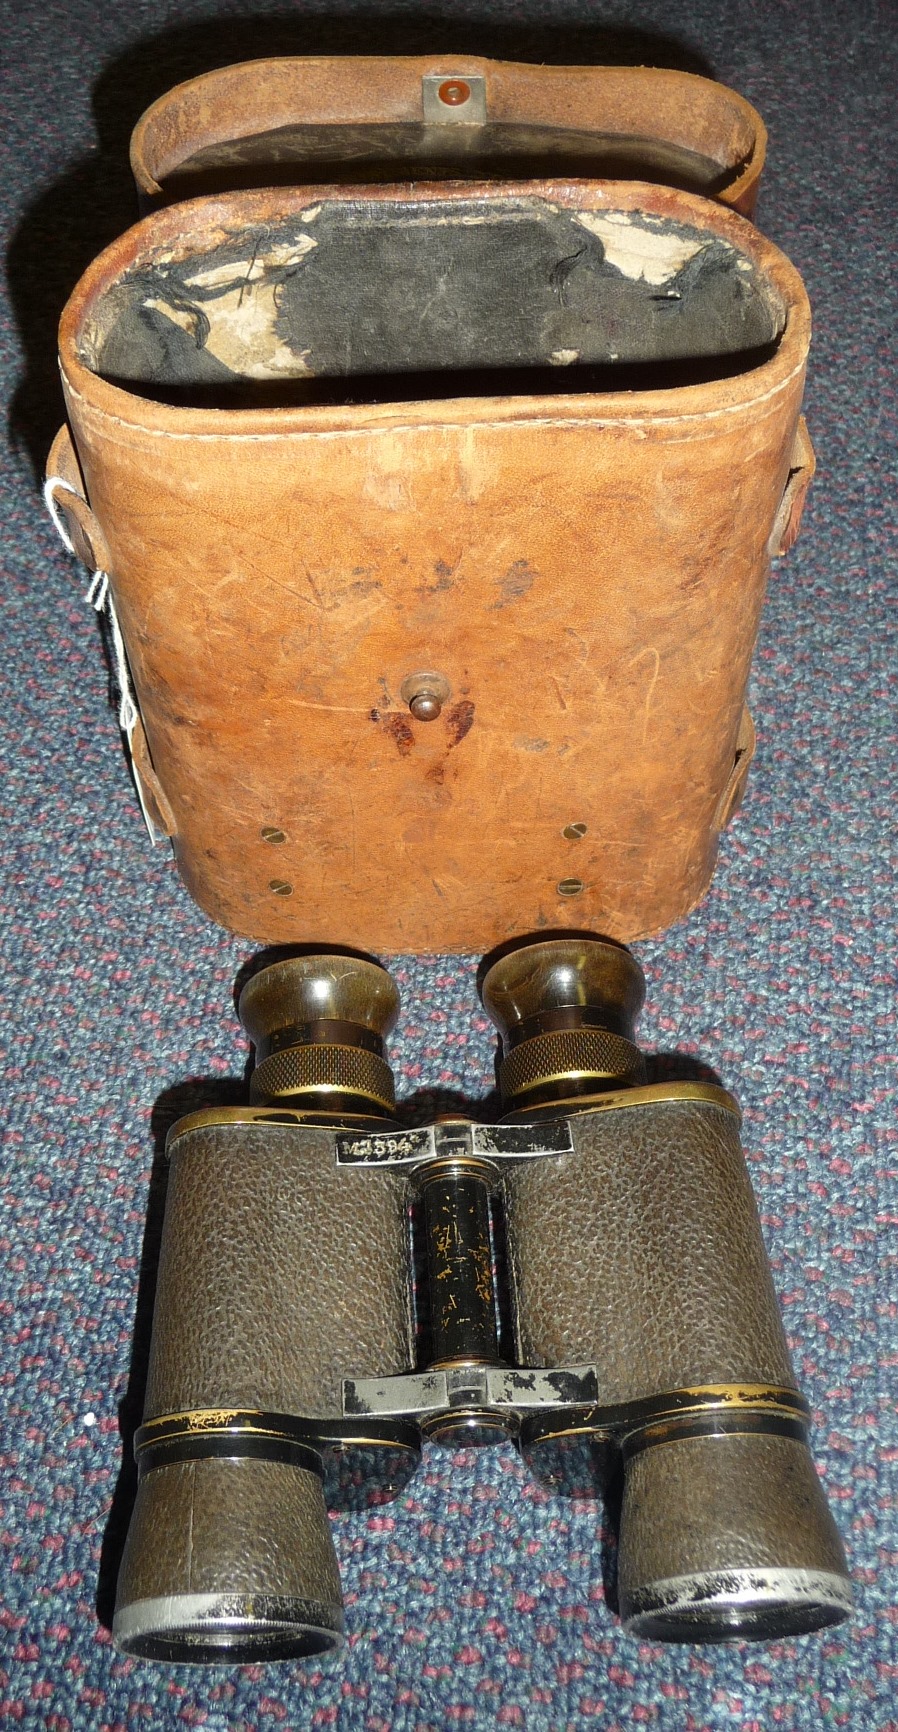 A Pair of French Military Issue Binoculars by Jules Huet & Cie, Paris, 12x, with black crinkled